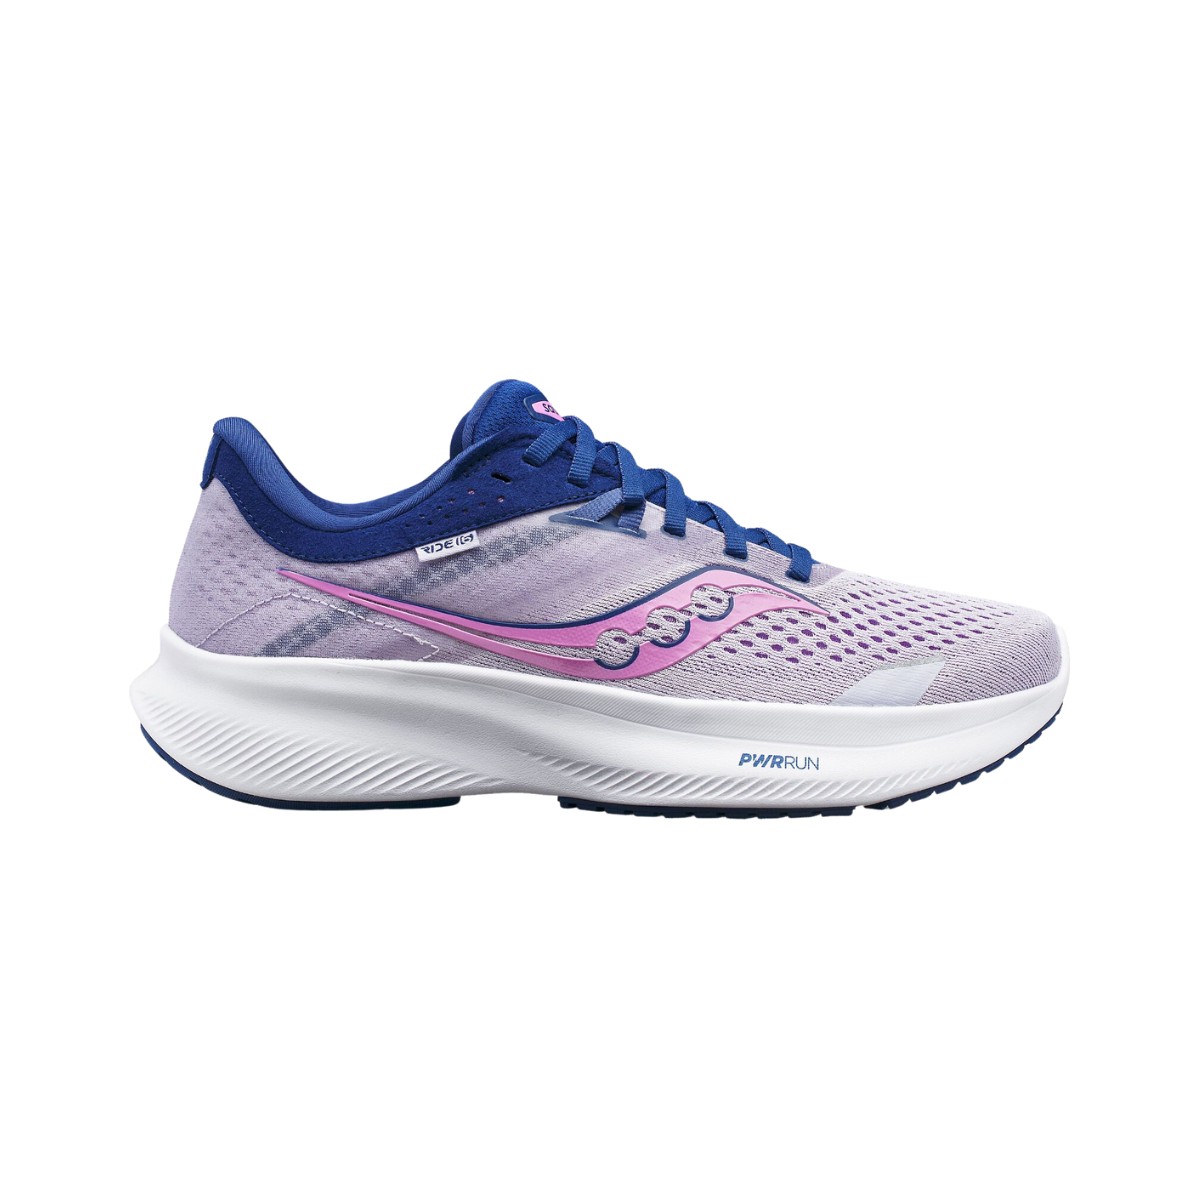 Buy Saucony Ride 16 Purple Blue White AW23 Women's Shoes| Free shipping